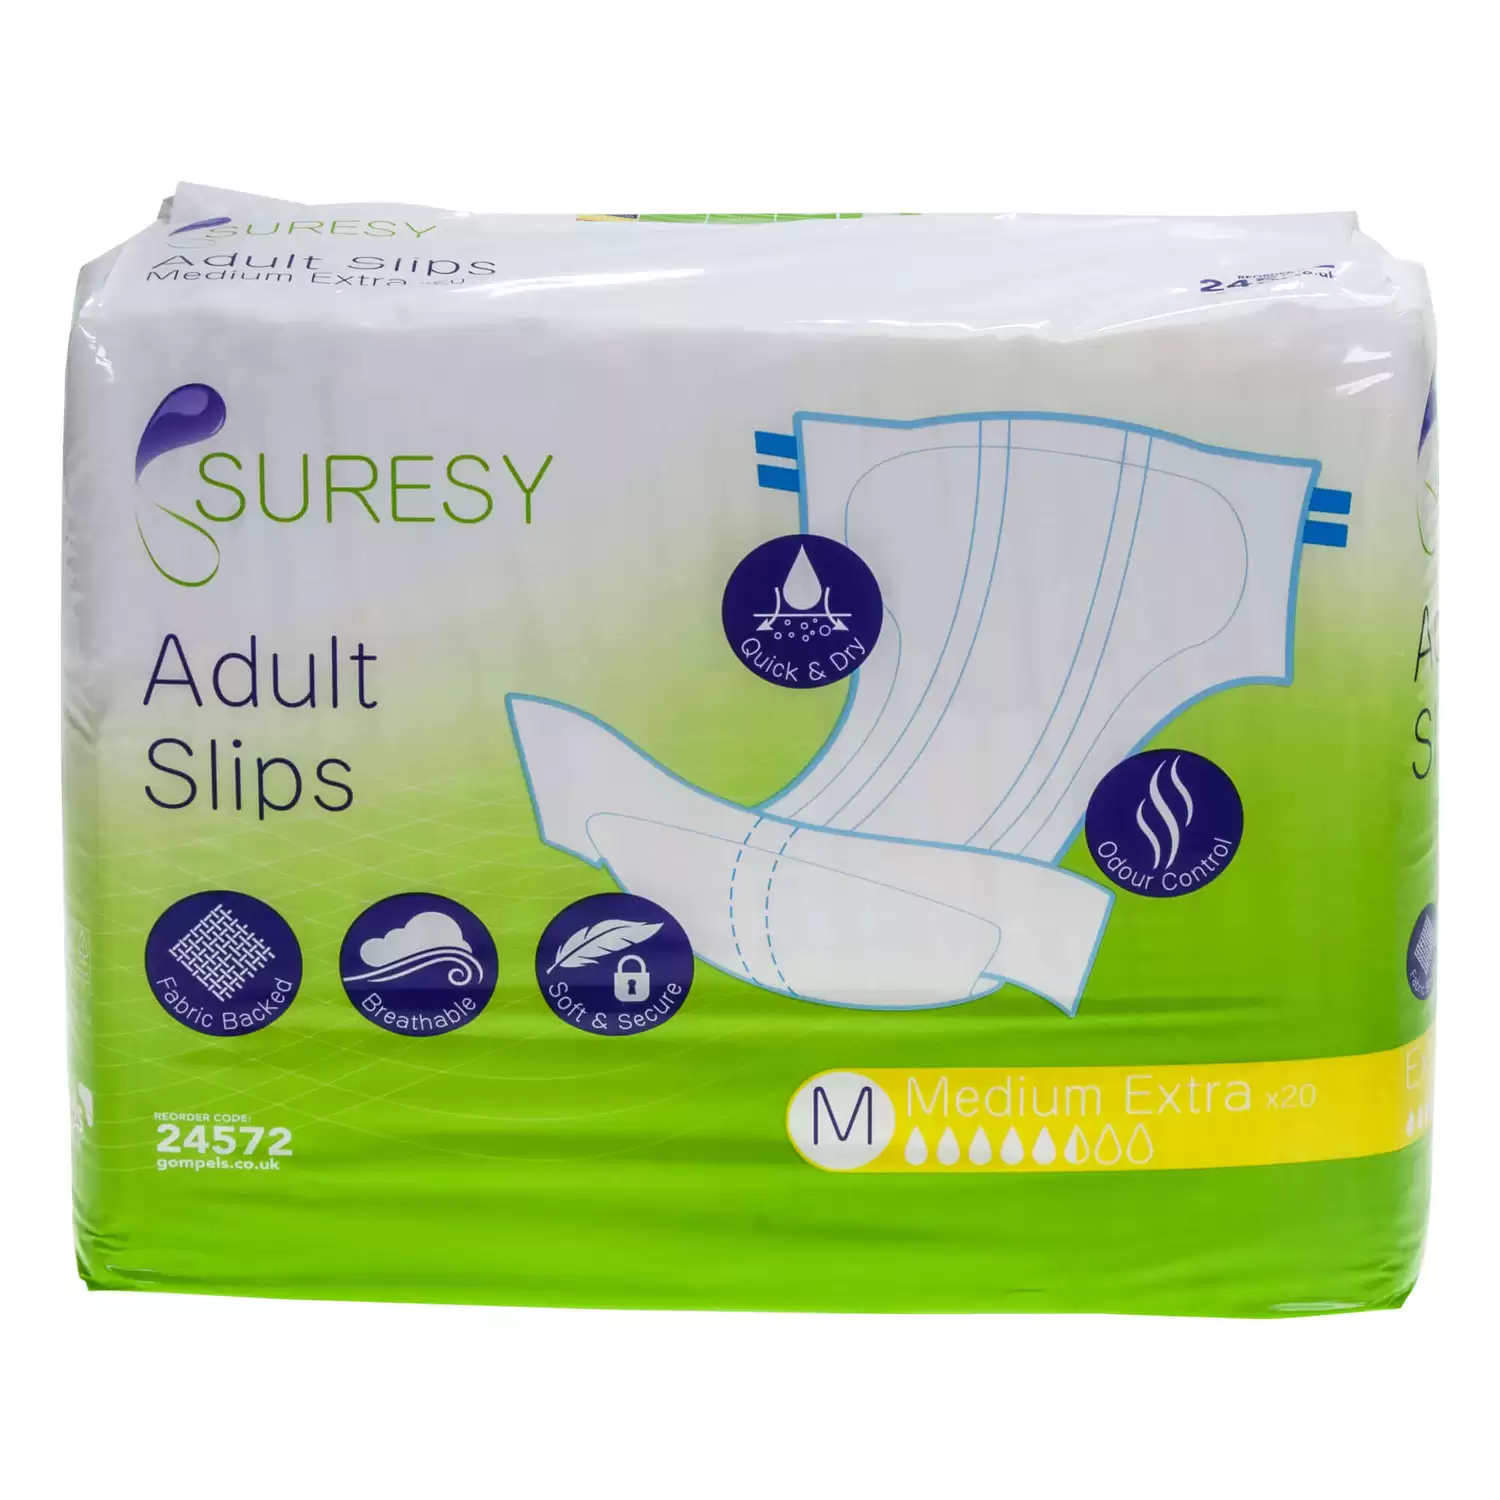 Suresy Slip Adult Nappies Medium Extra 20 Pack - Gompels - Care